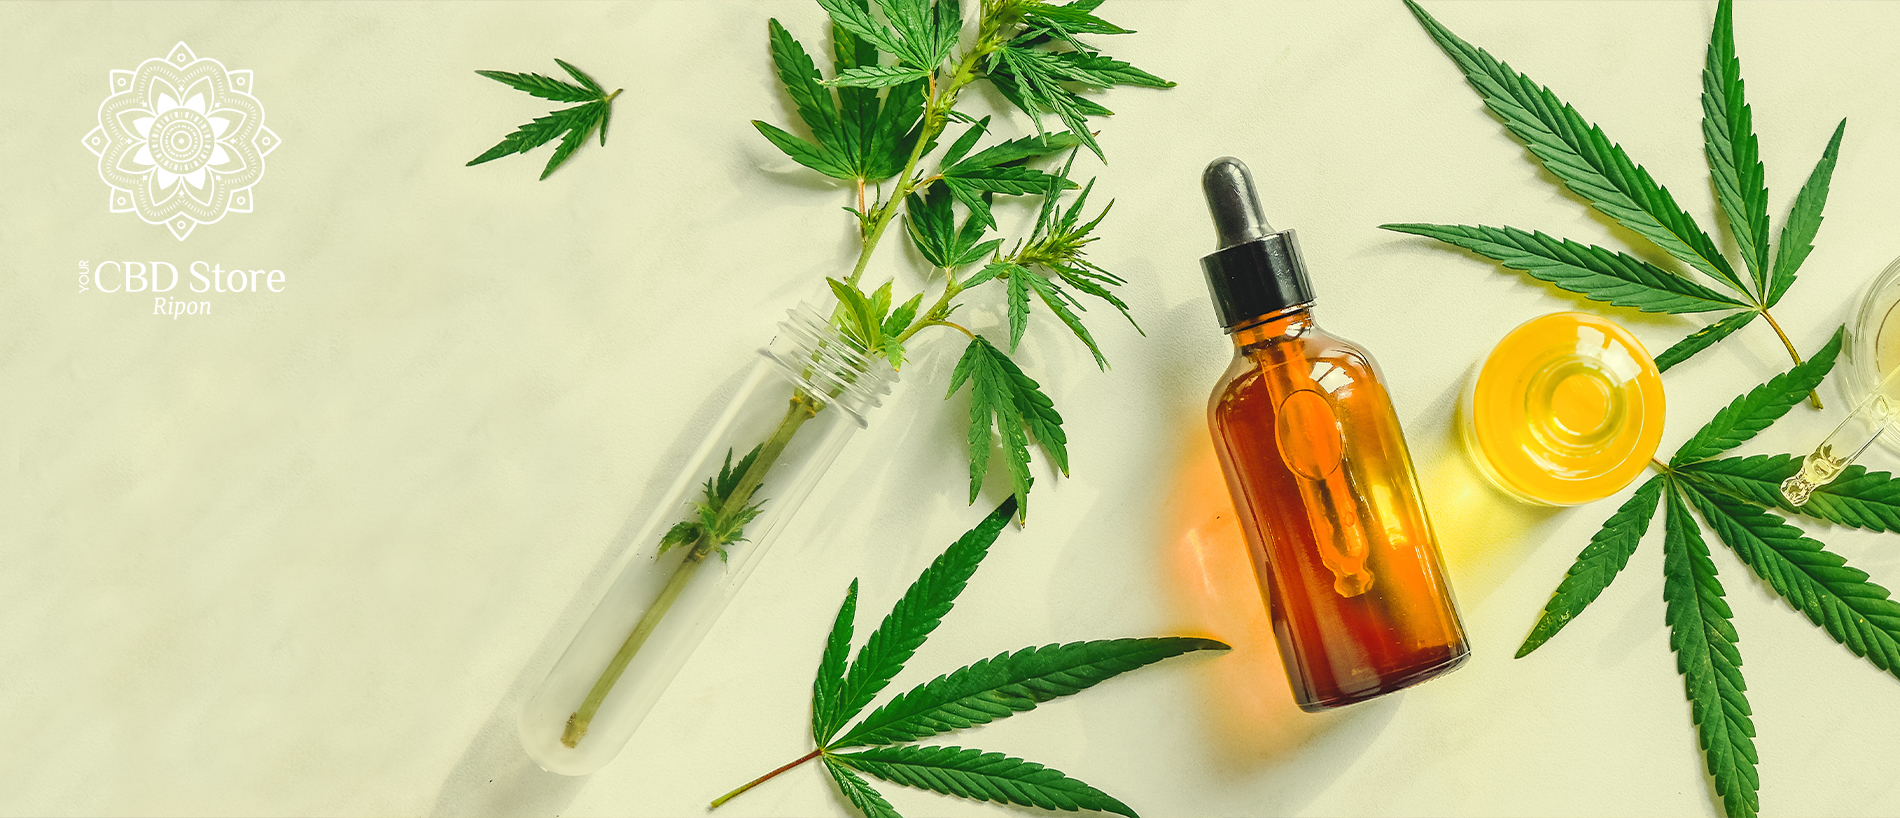 How do CBD Skincare Products Work?